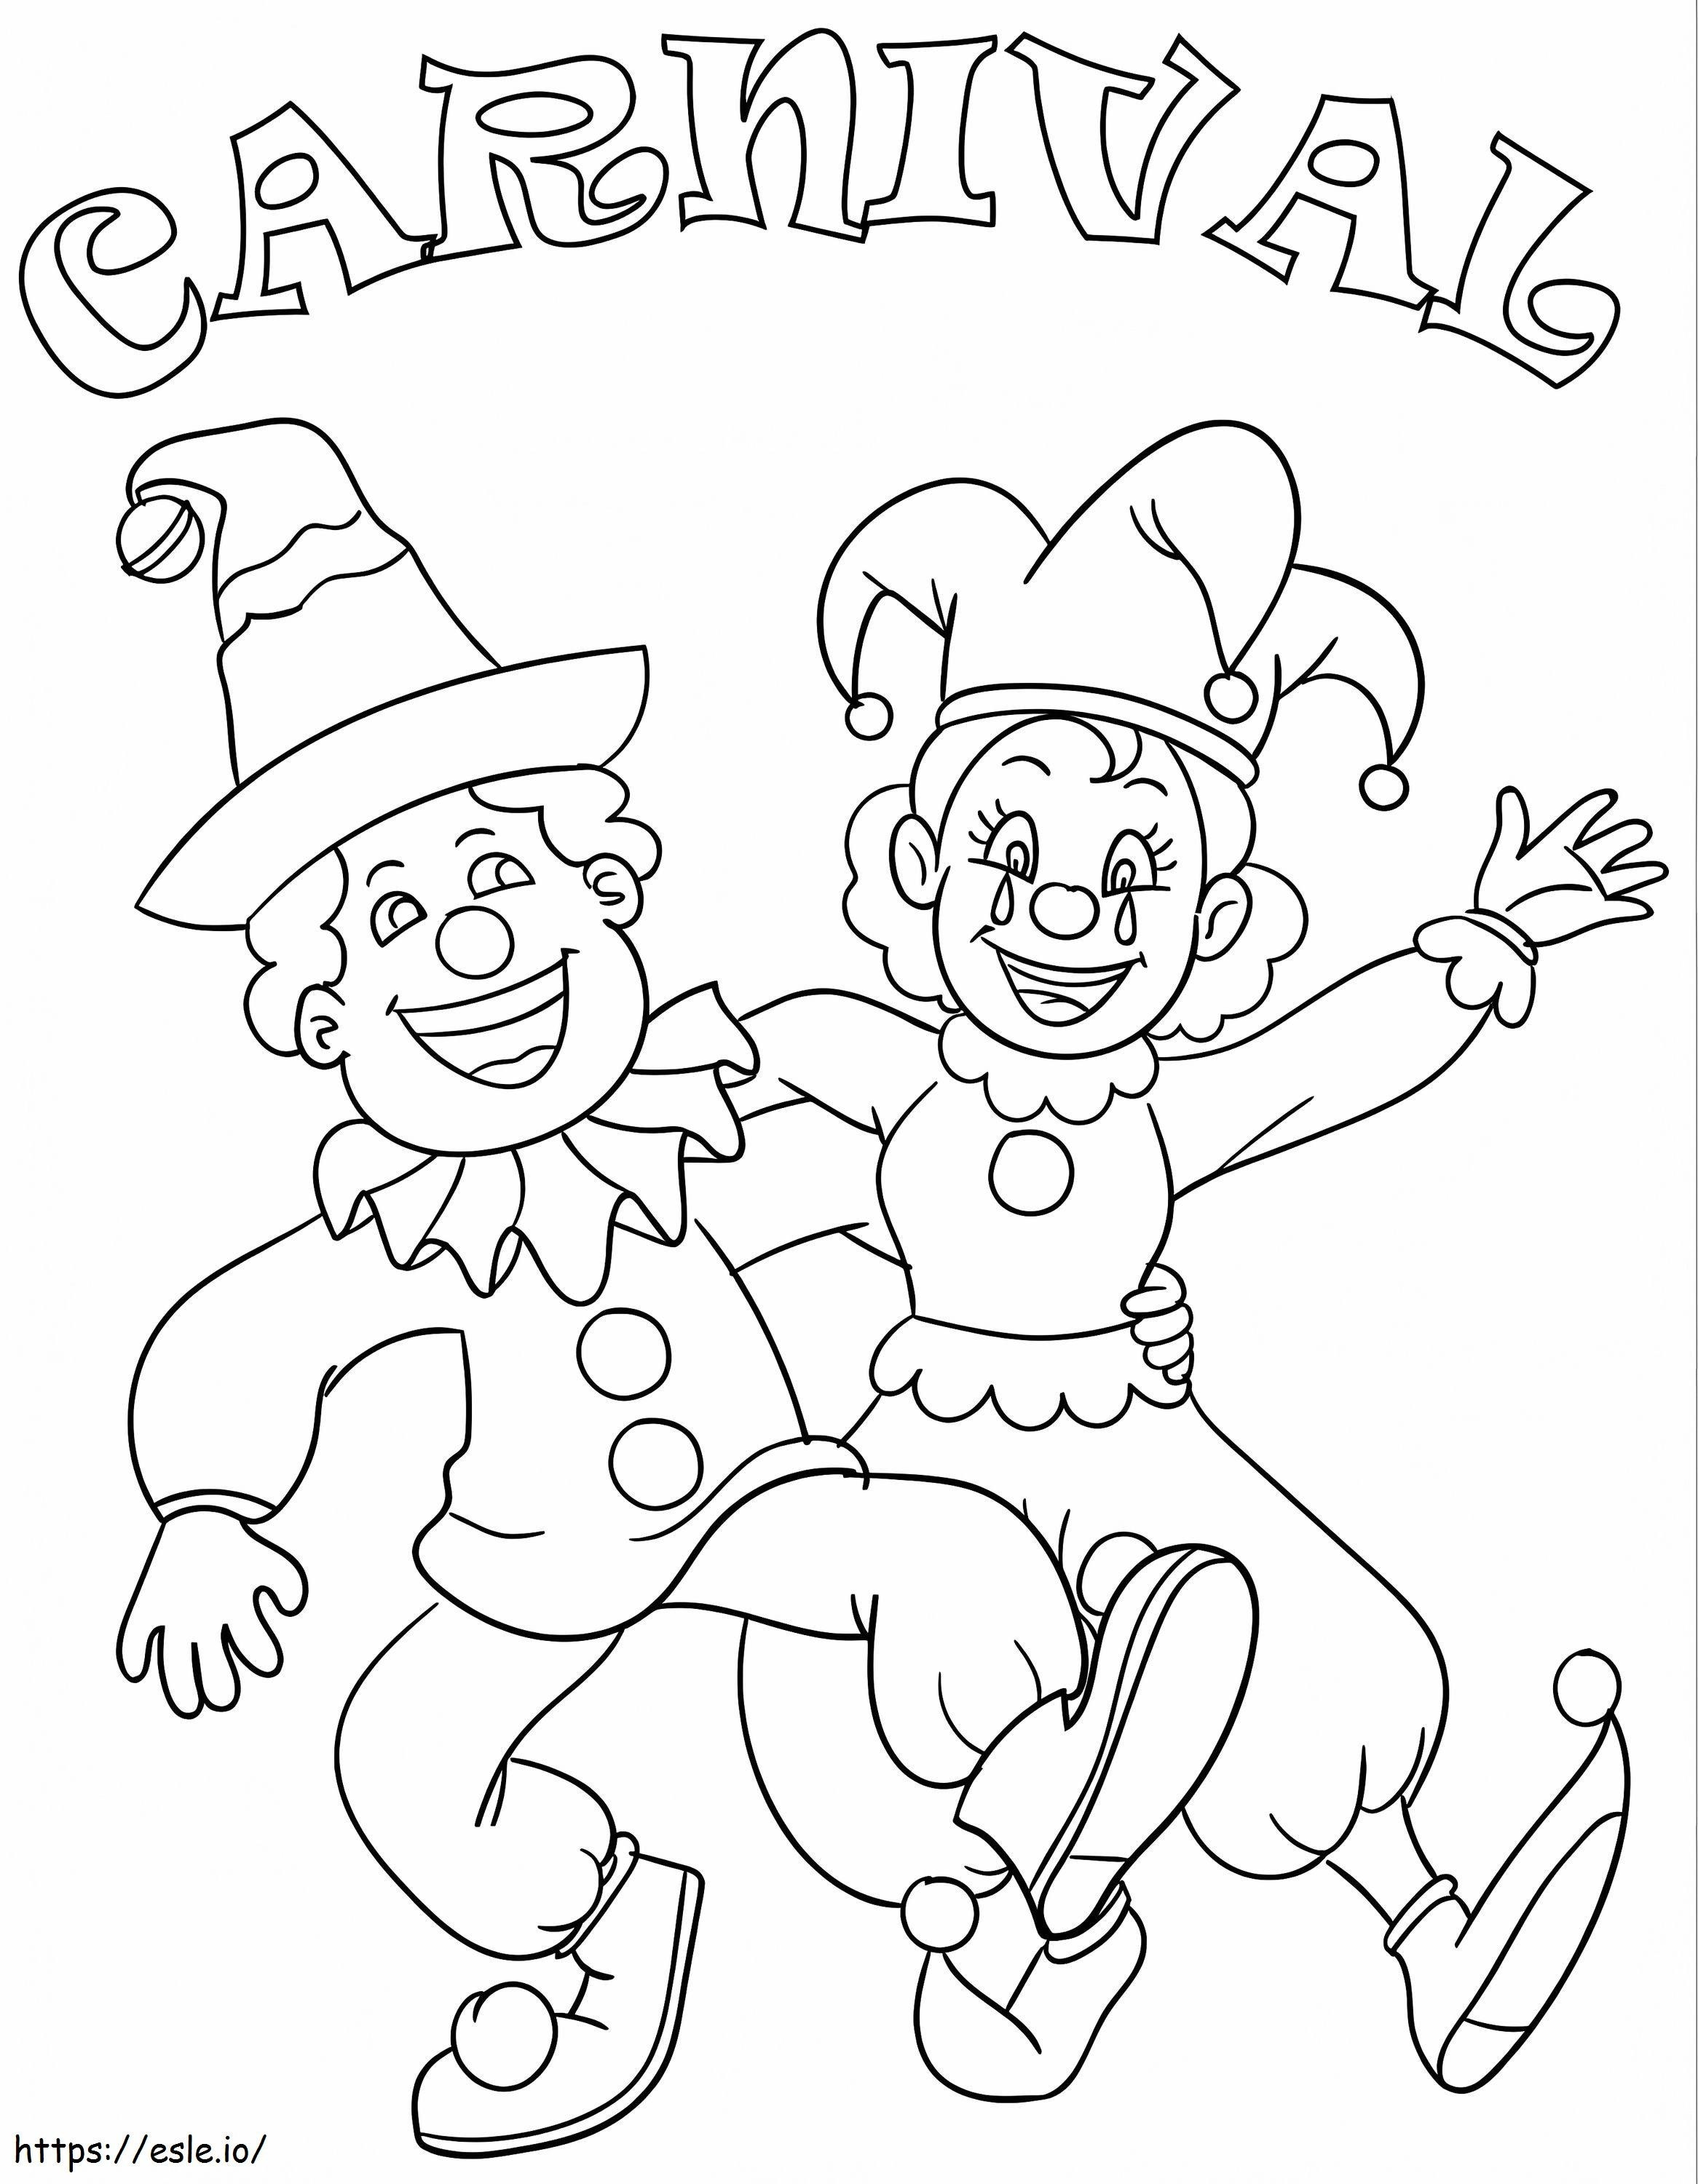 Funny Carnival coloring page